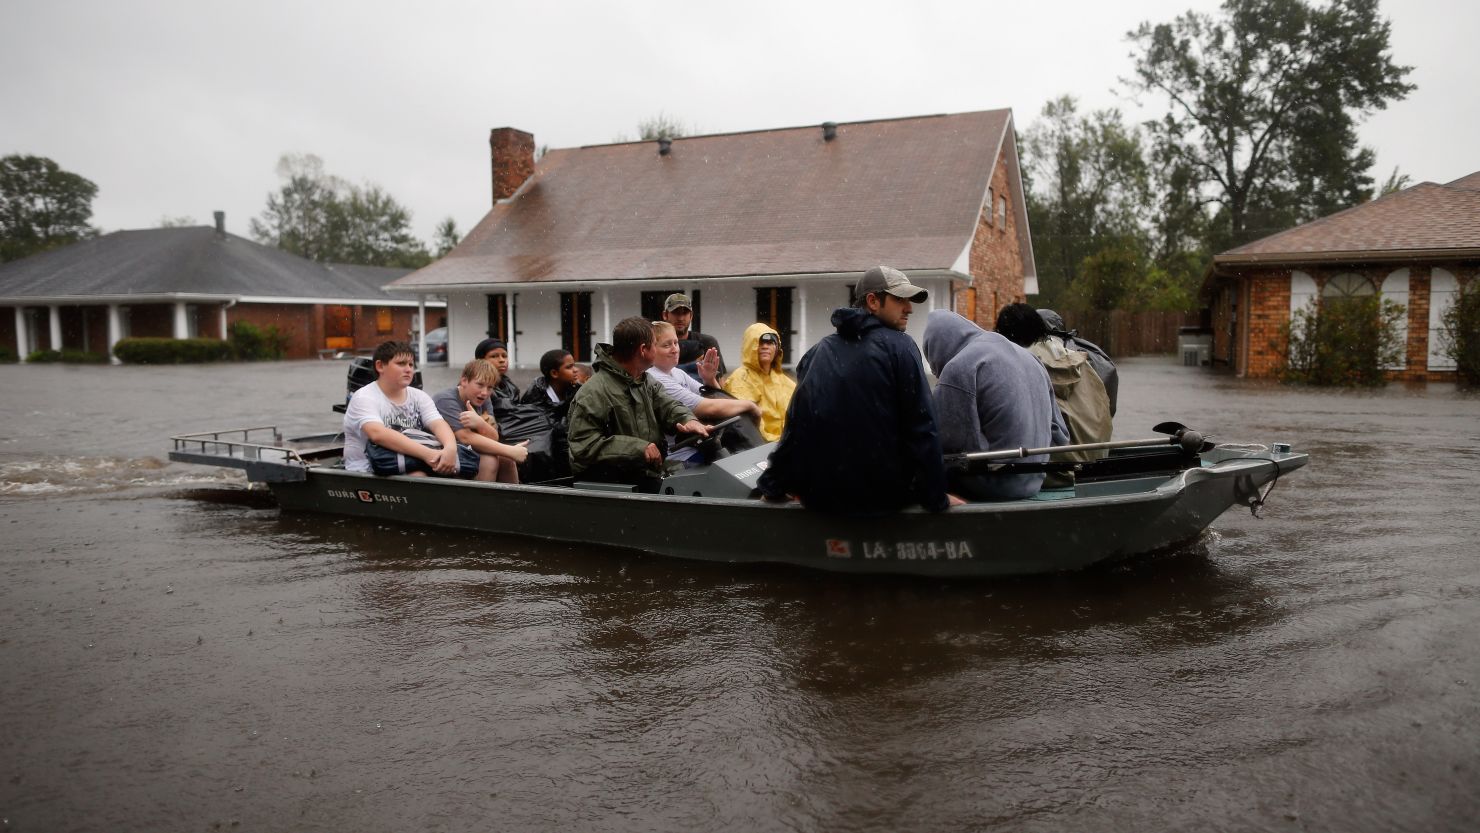 Rescue workers transport residents trapped by rising water from Tropical Storm Isaac in LaPlace, Louisiana, on Wednesday. The storm was later downgraded to a Tropical Depression.